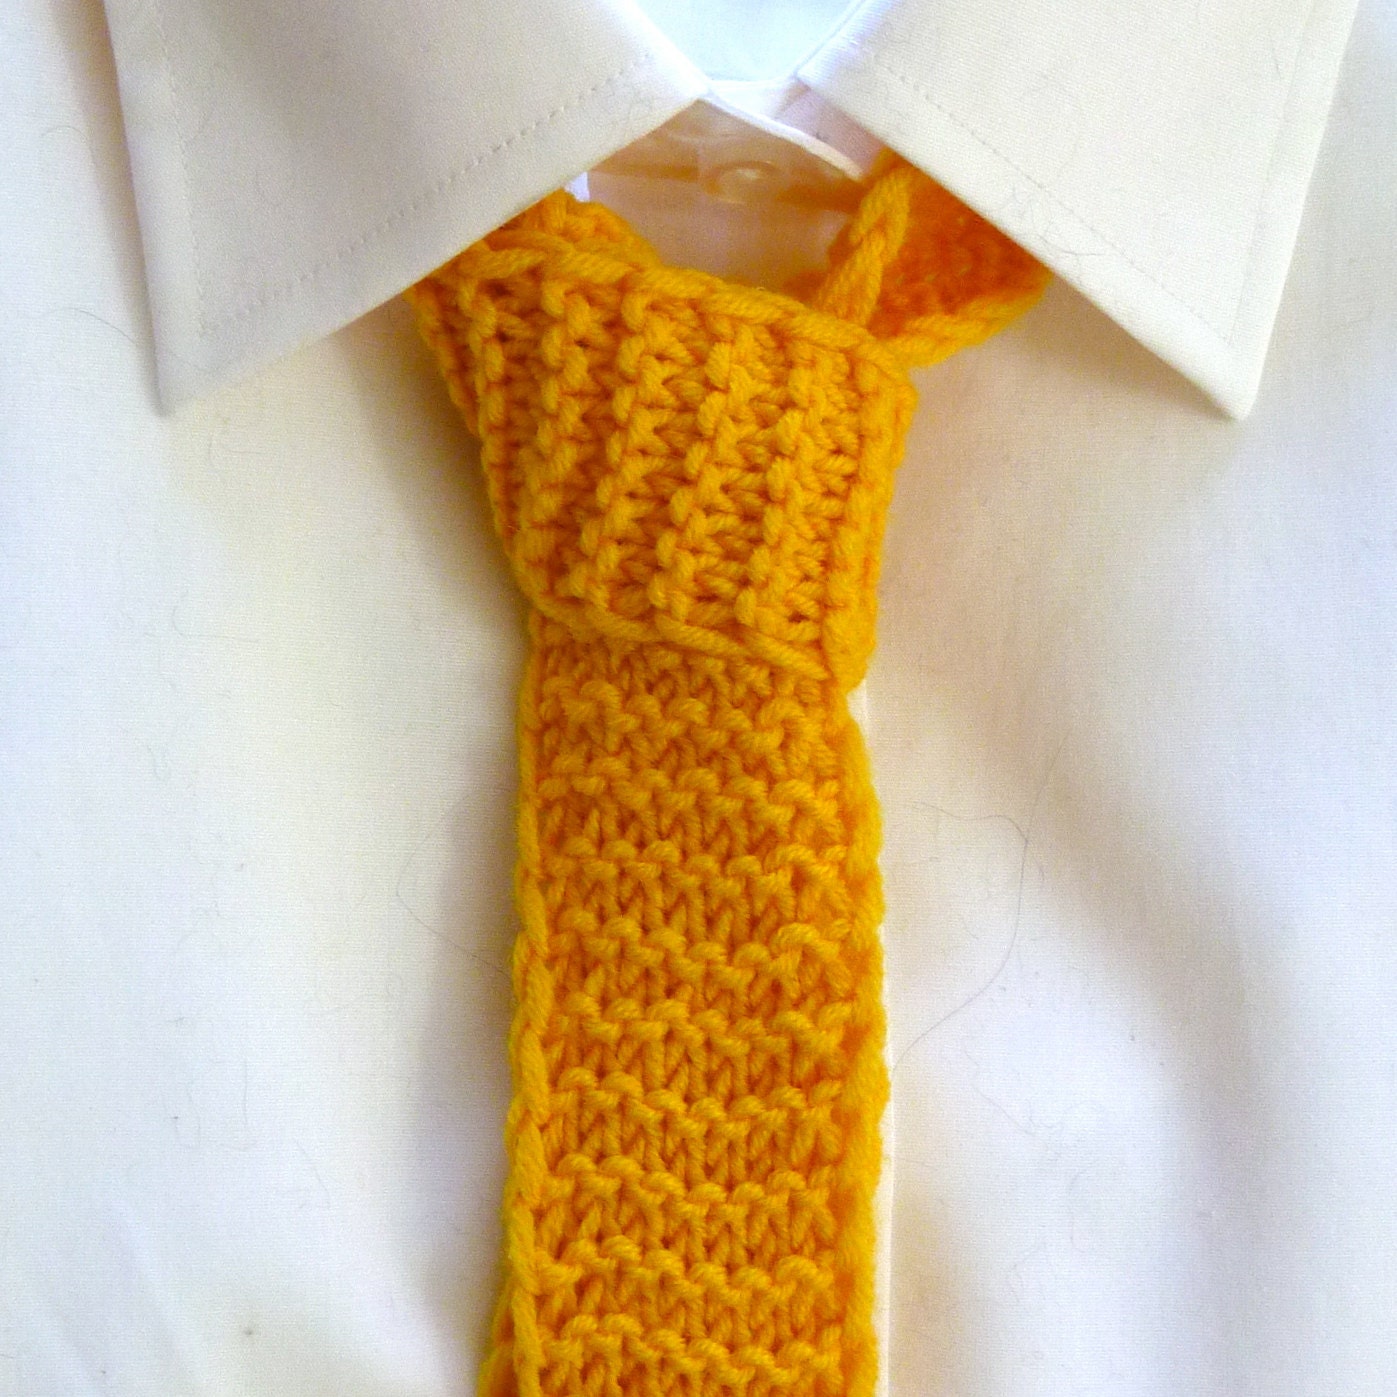 Knit Tie, Yellow Knit Tie, Pure Italian Superfine Merino Wool Tie in Sun Yellow, 22 Color options, Free Shipping